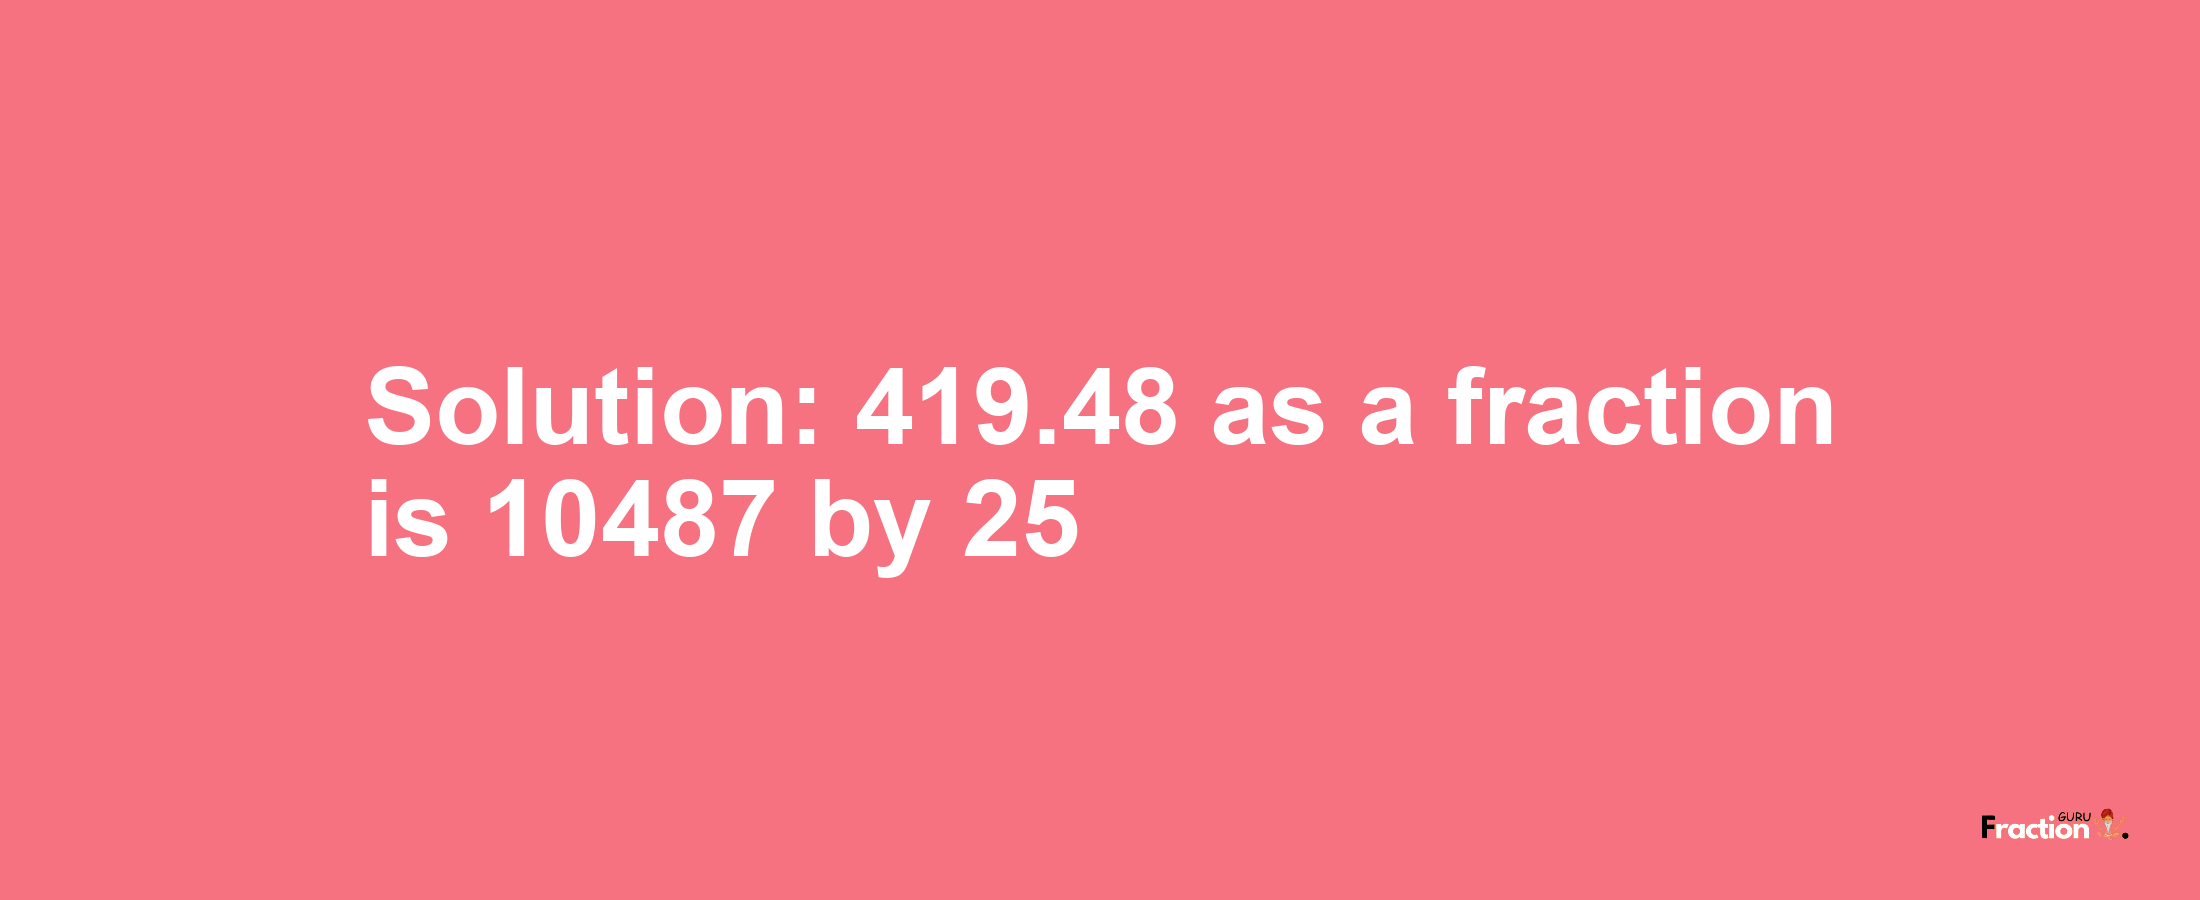 Solution:419.48 as a fraction is 10487/25